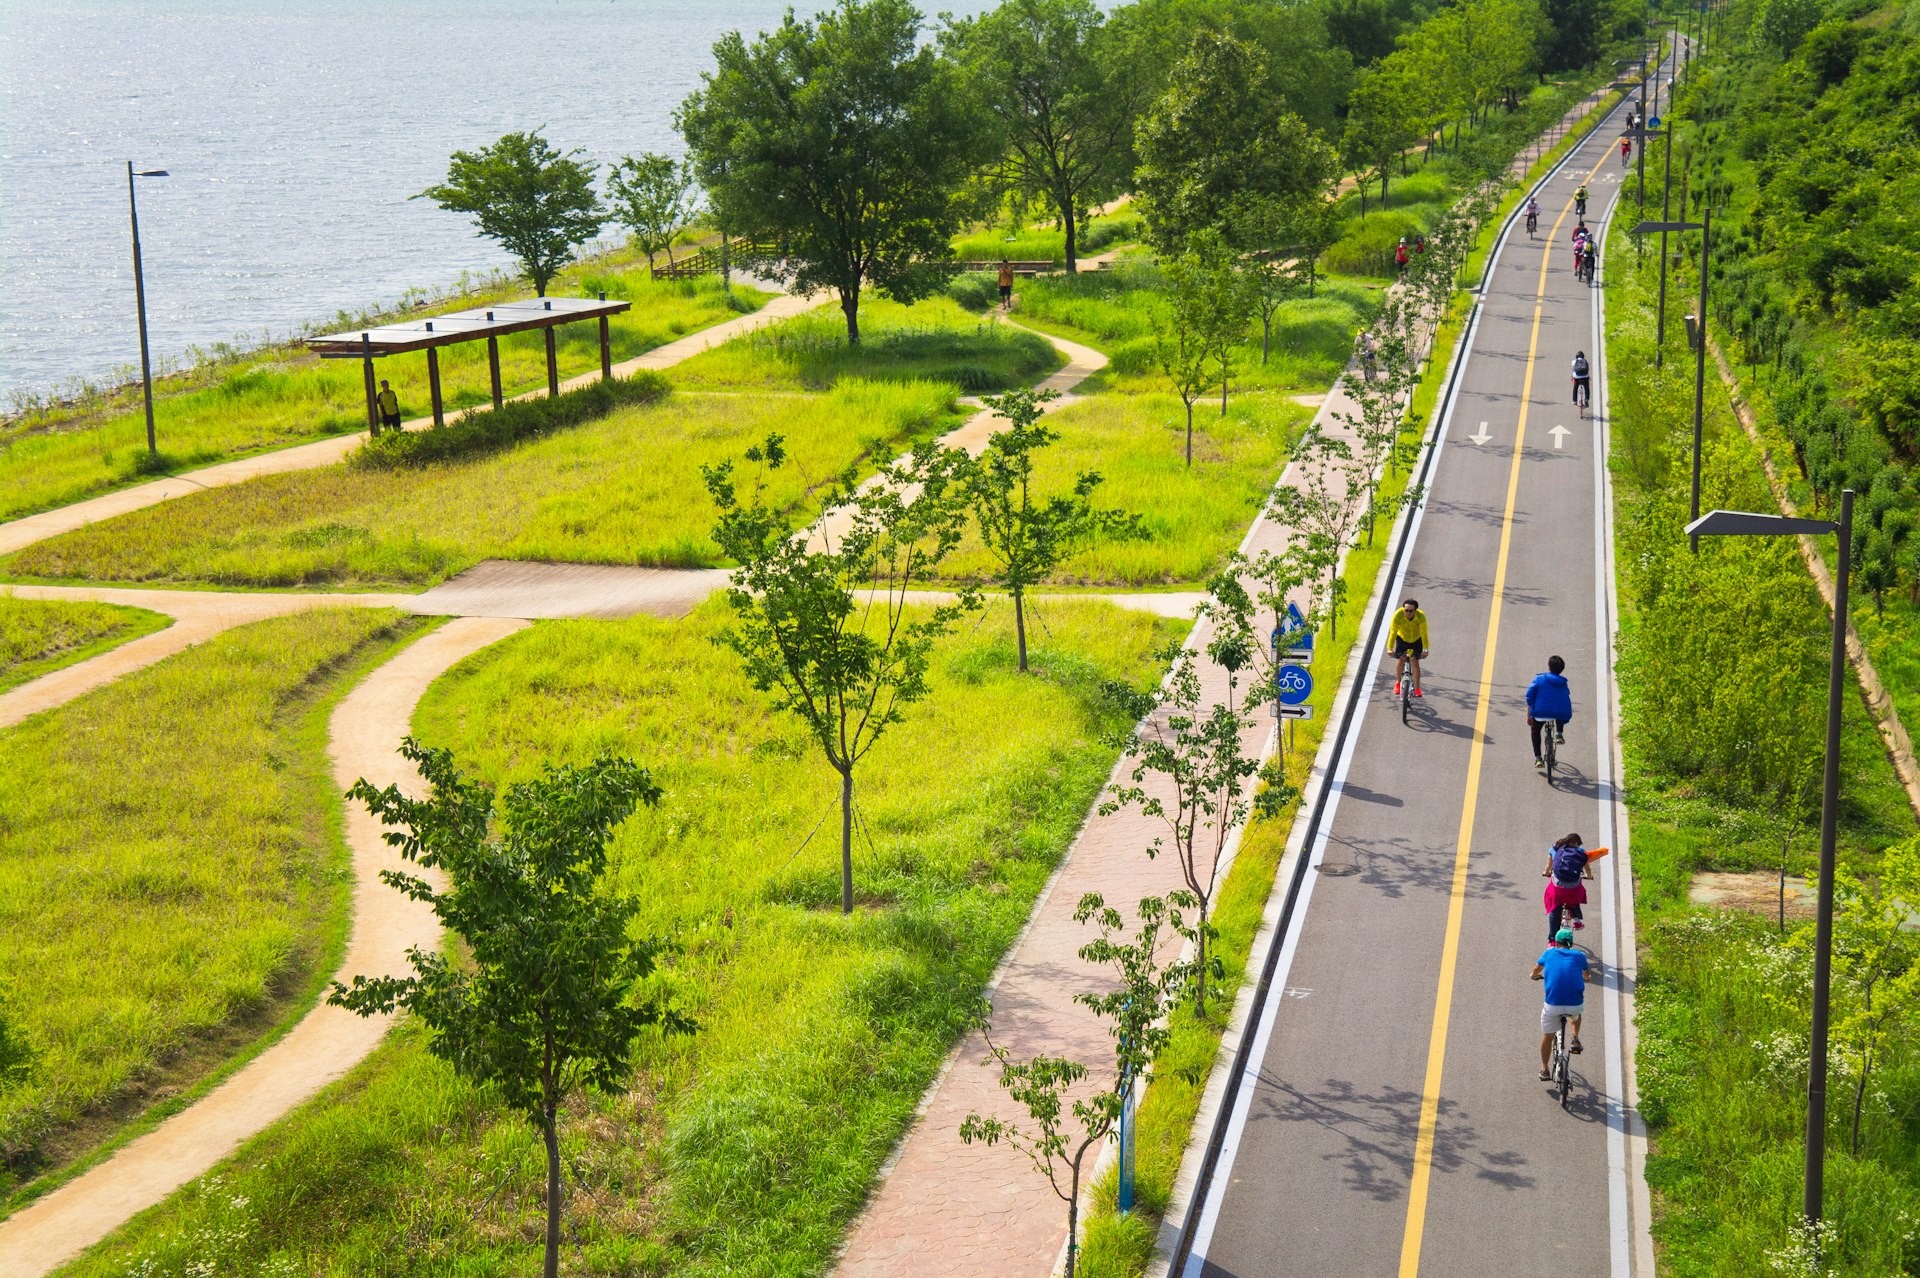 Cyclists ride along a paved path in the Mangwon section of the riverside park along Han River, Seoul